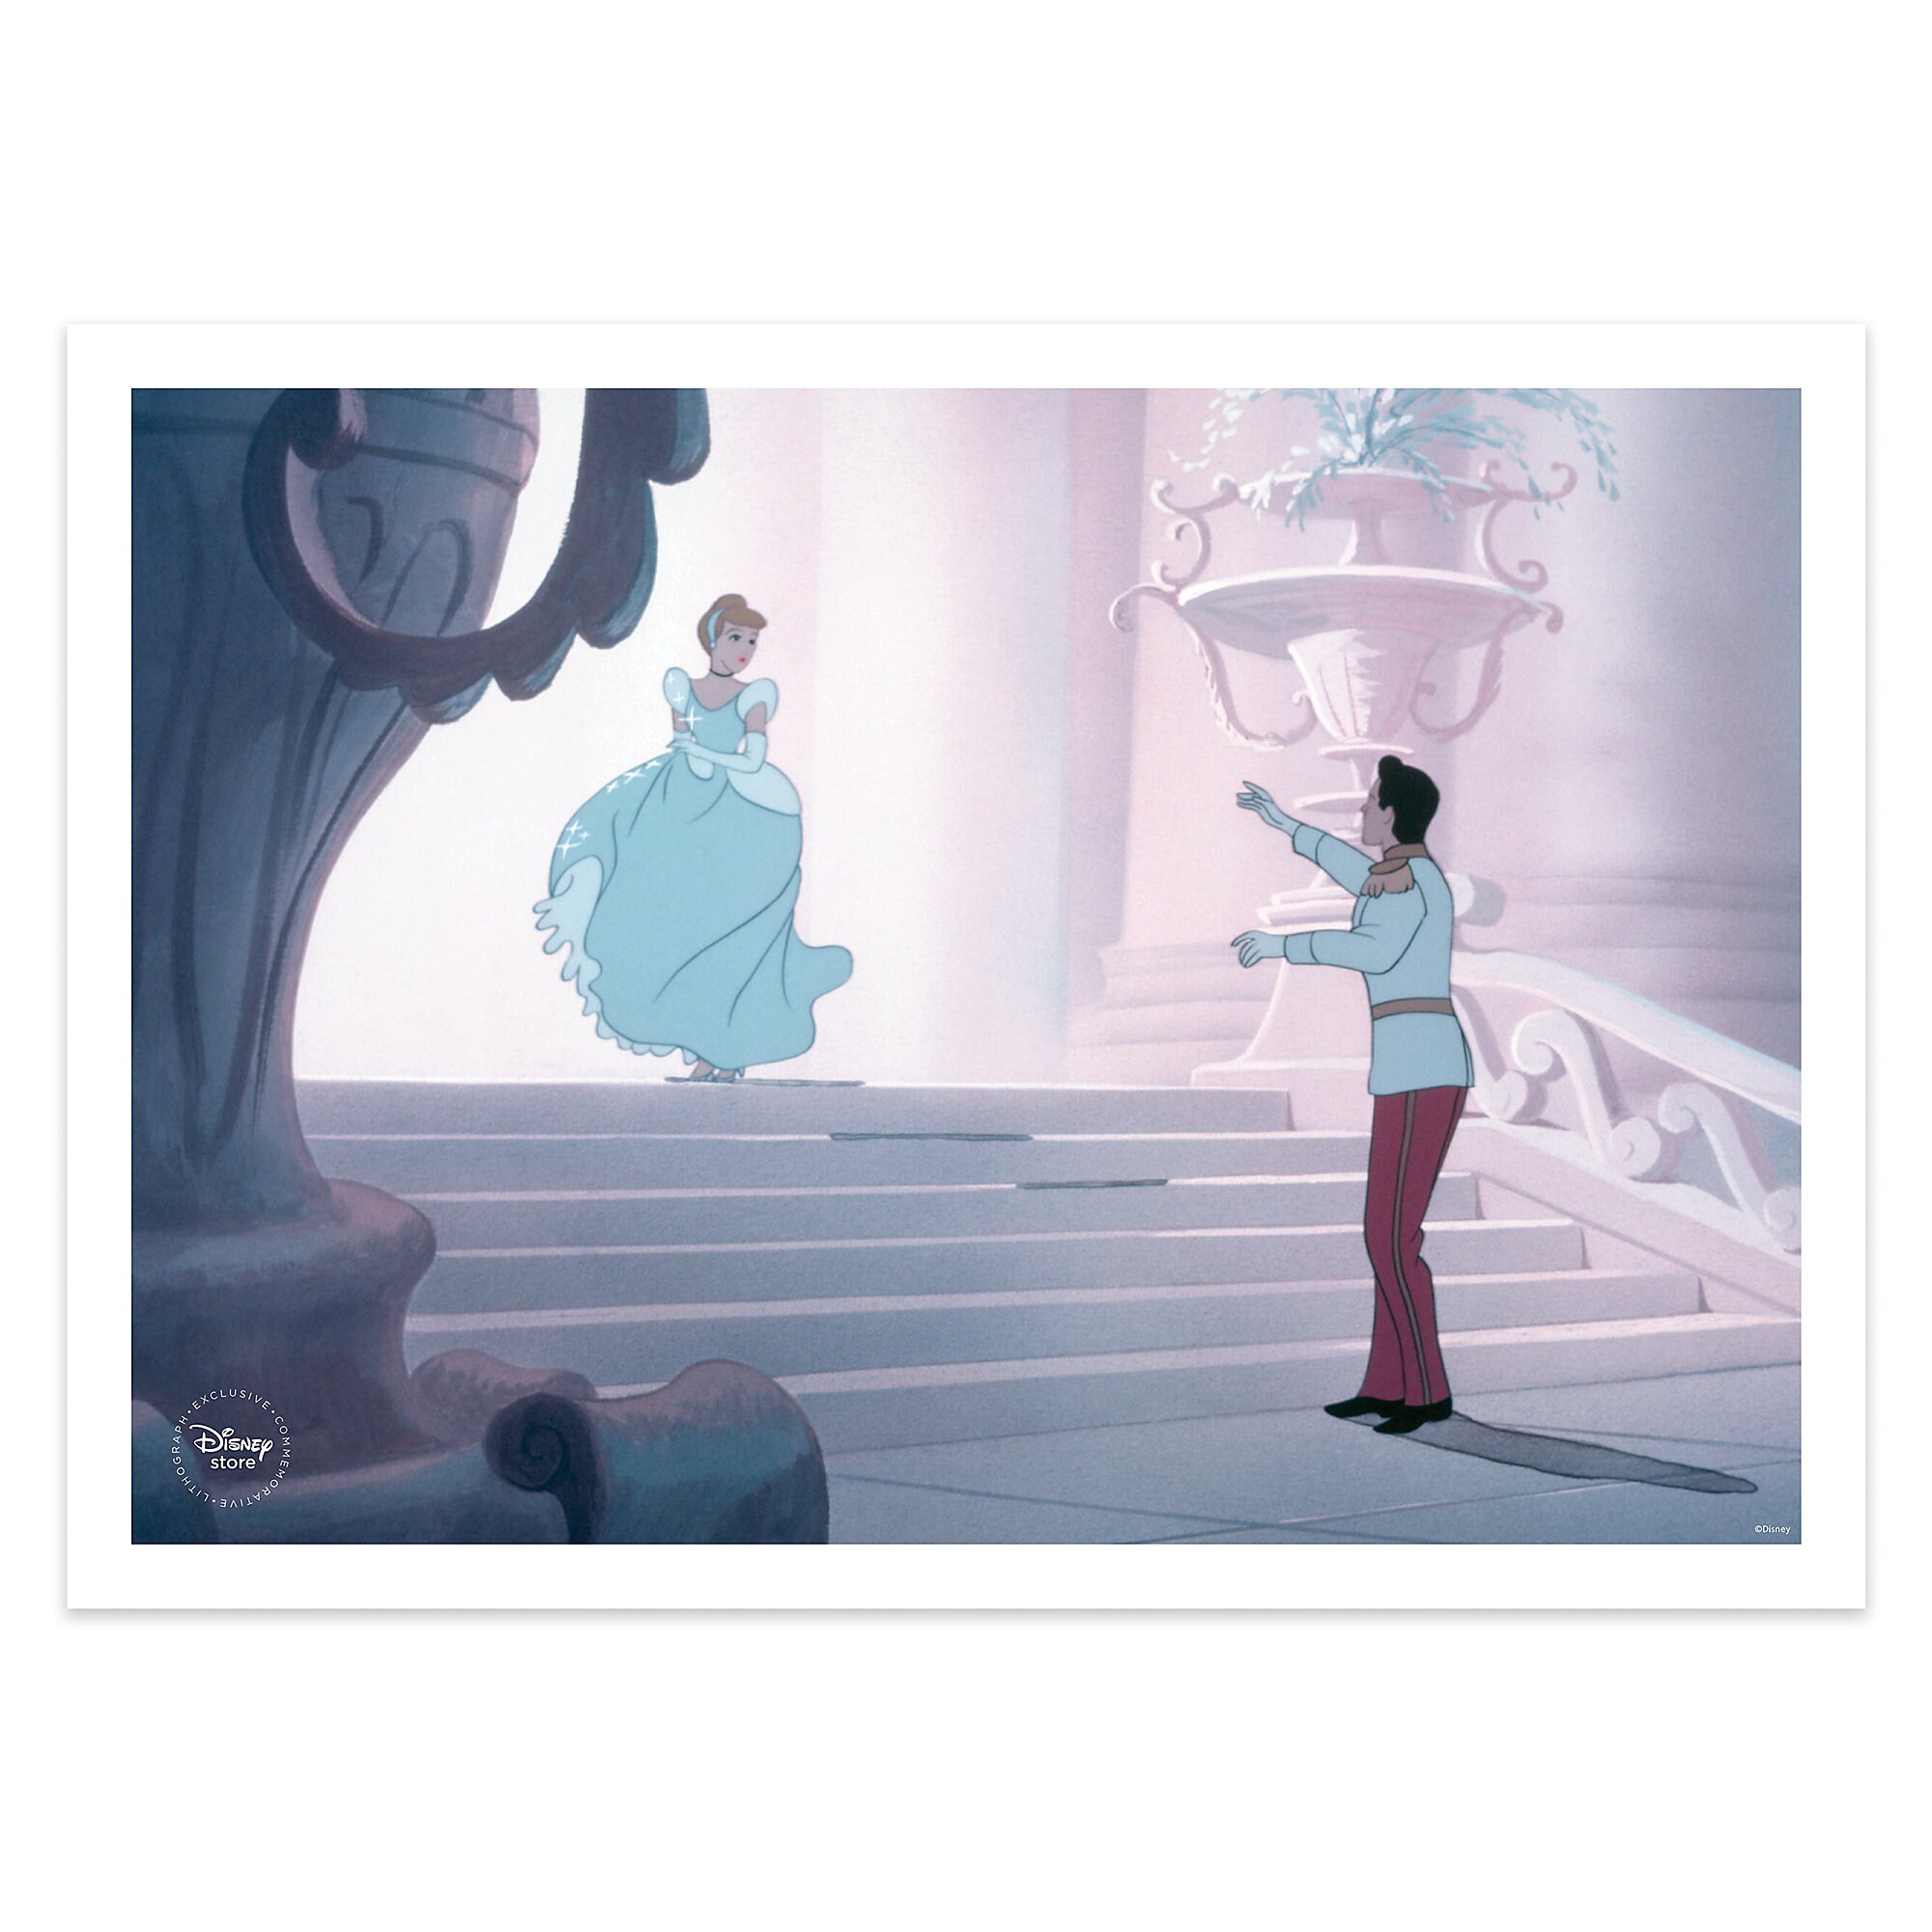 Cinderella Blu-ray Combo Pack with FREE Lithograph Set Offer - Pre-Order